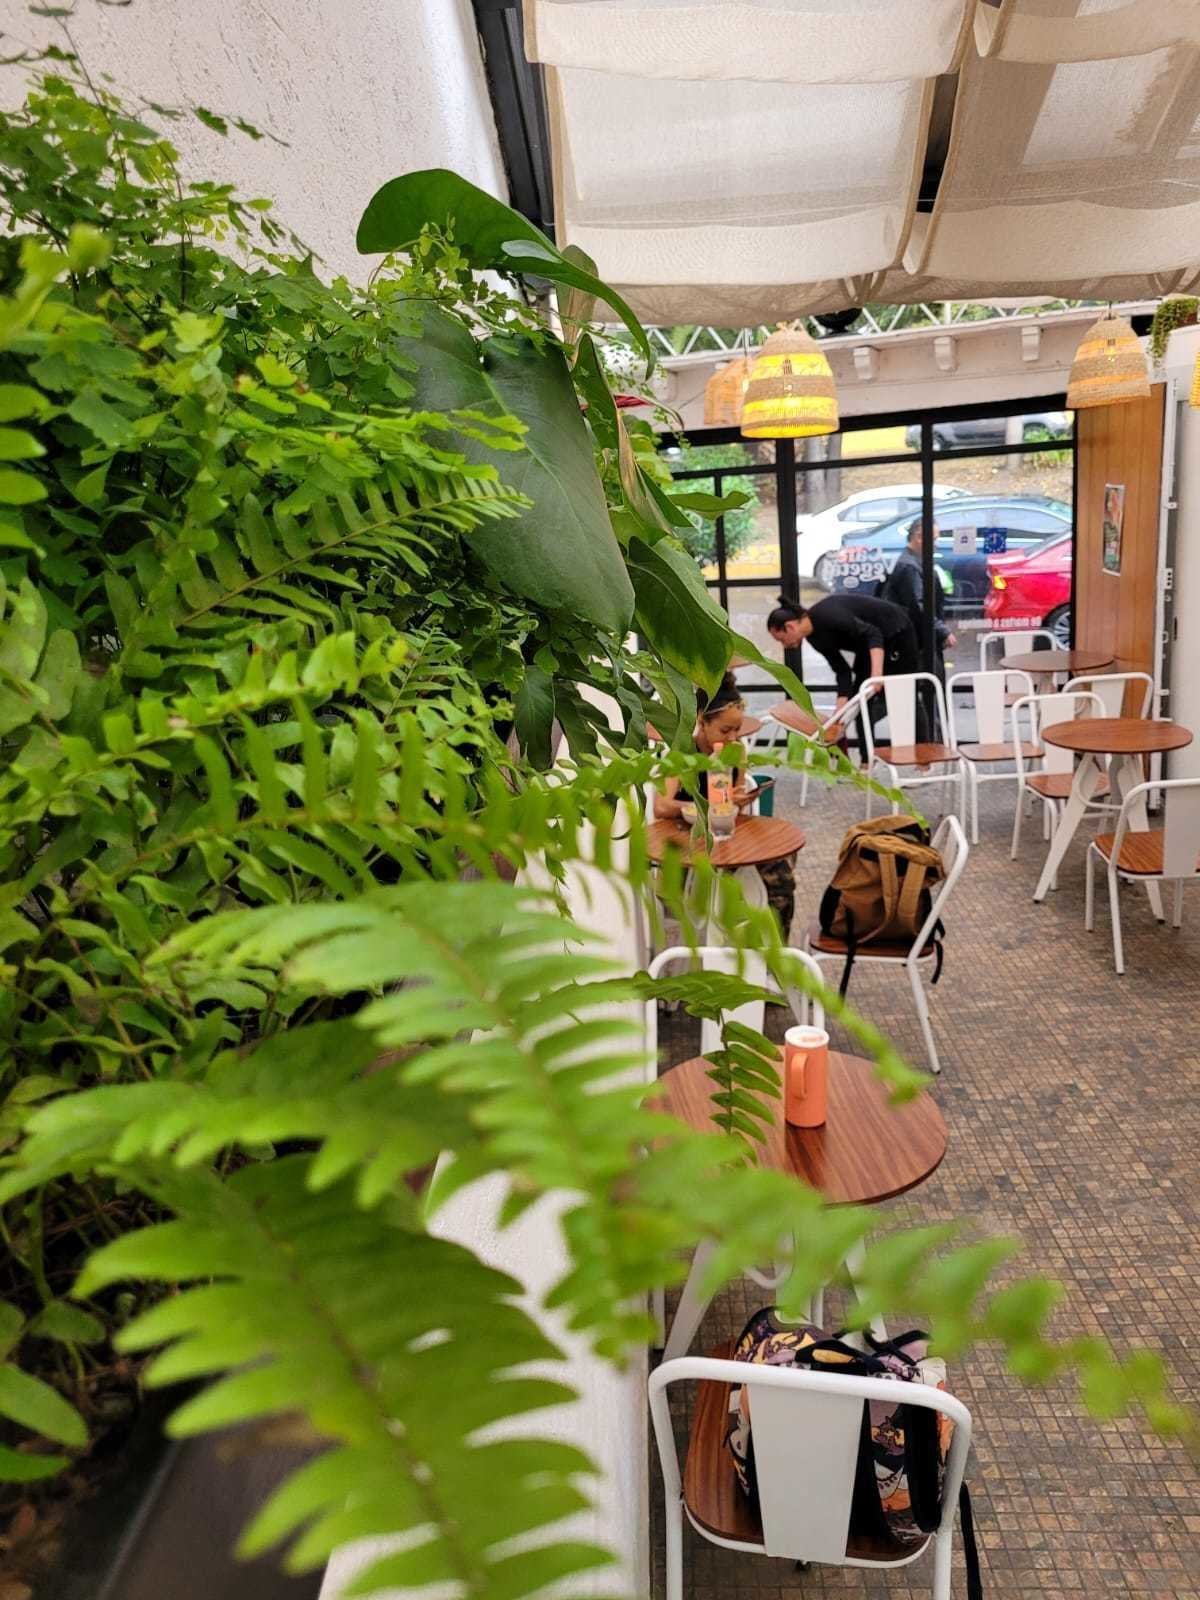 <span class="translation_missing" title="translation missing: en.meta.location_title, location_name: Café Vegetal, city: Mexico City">Location Title</span>